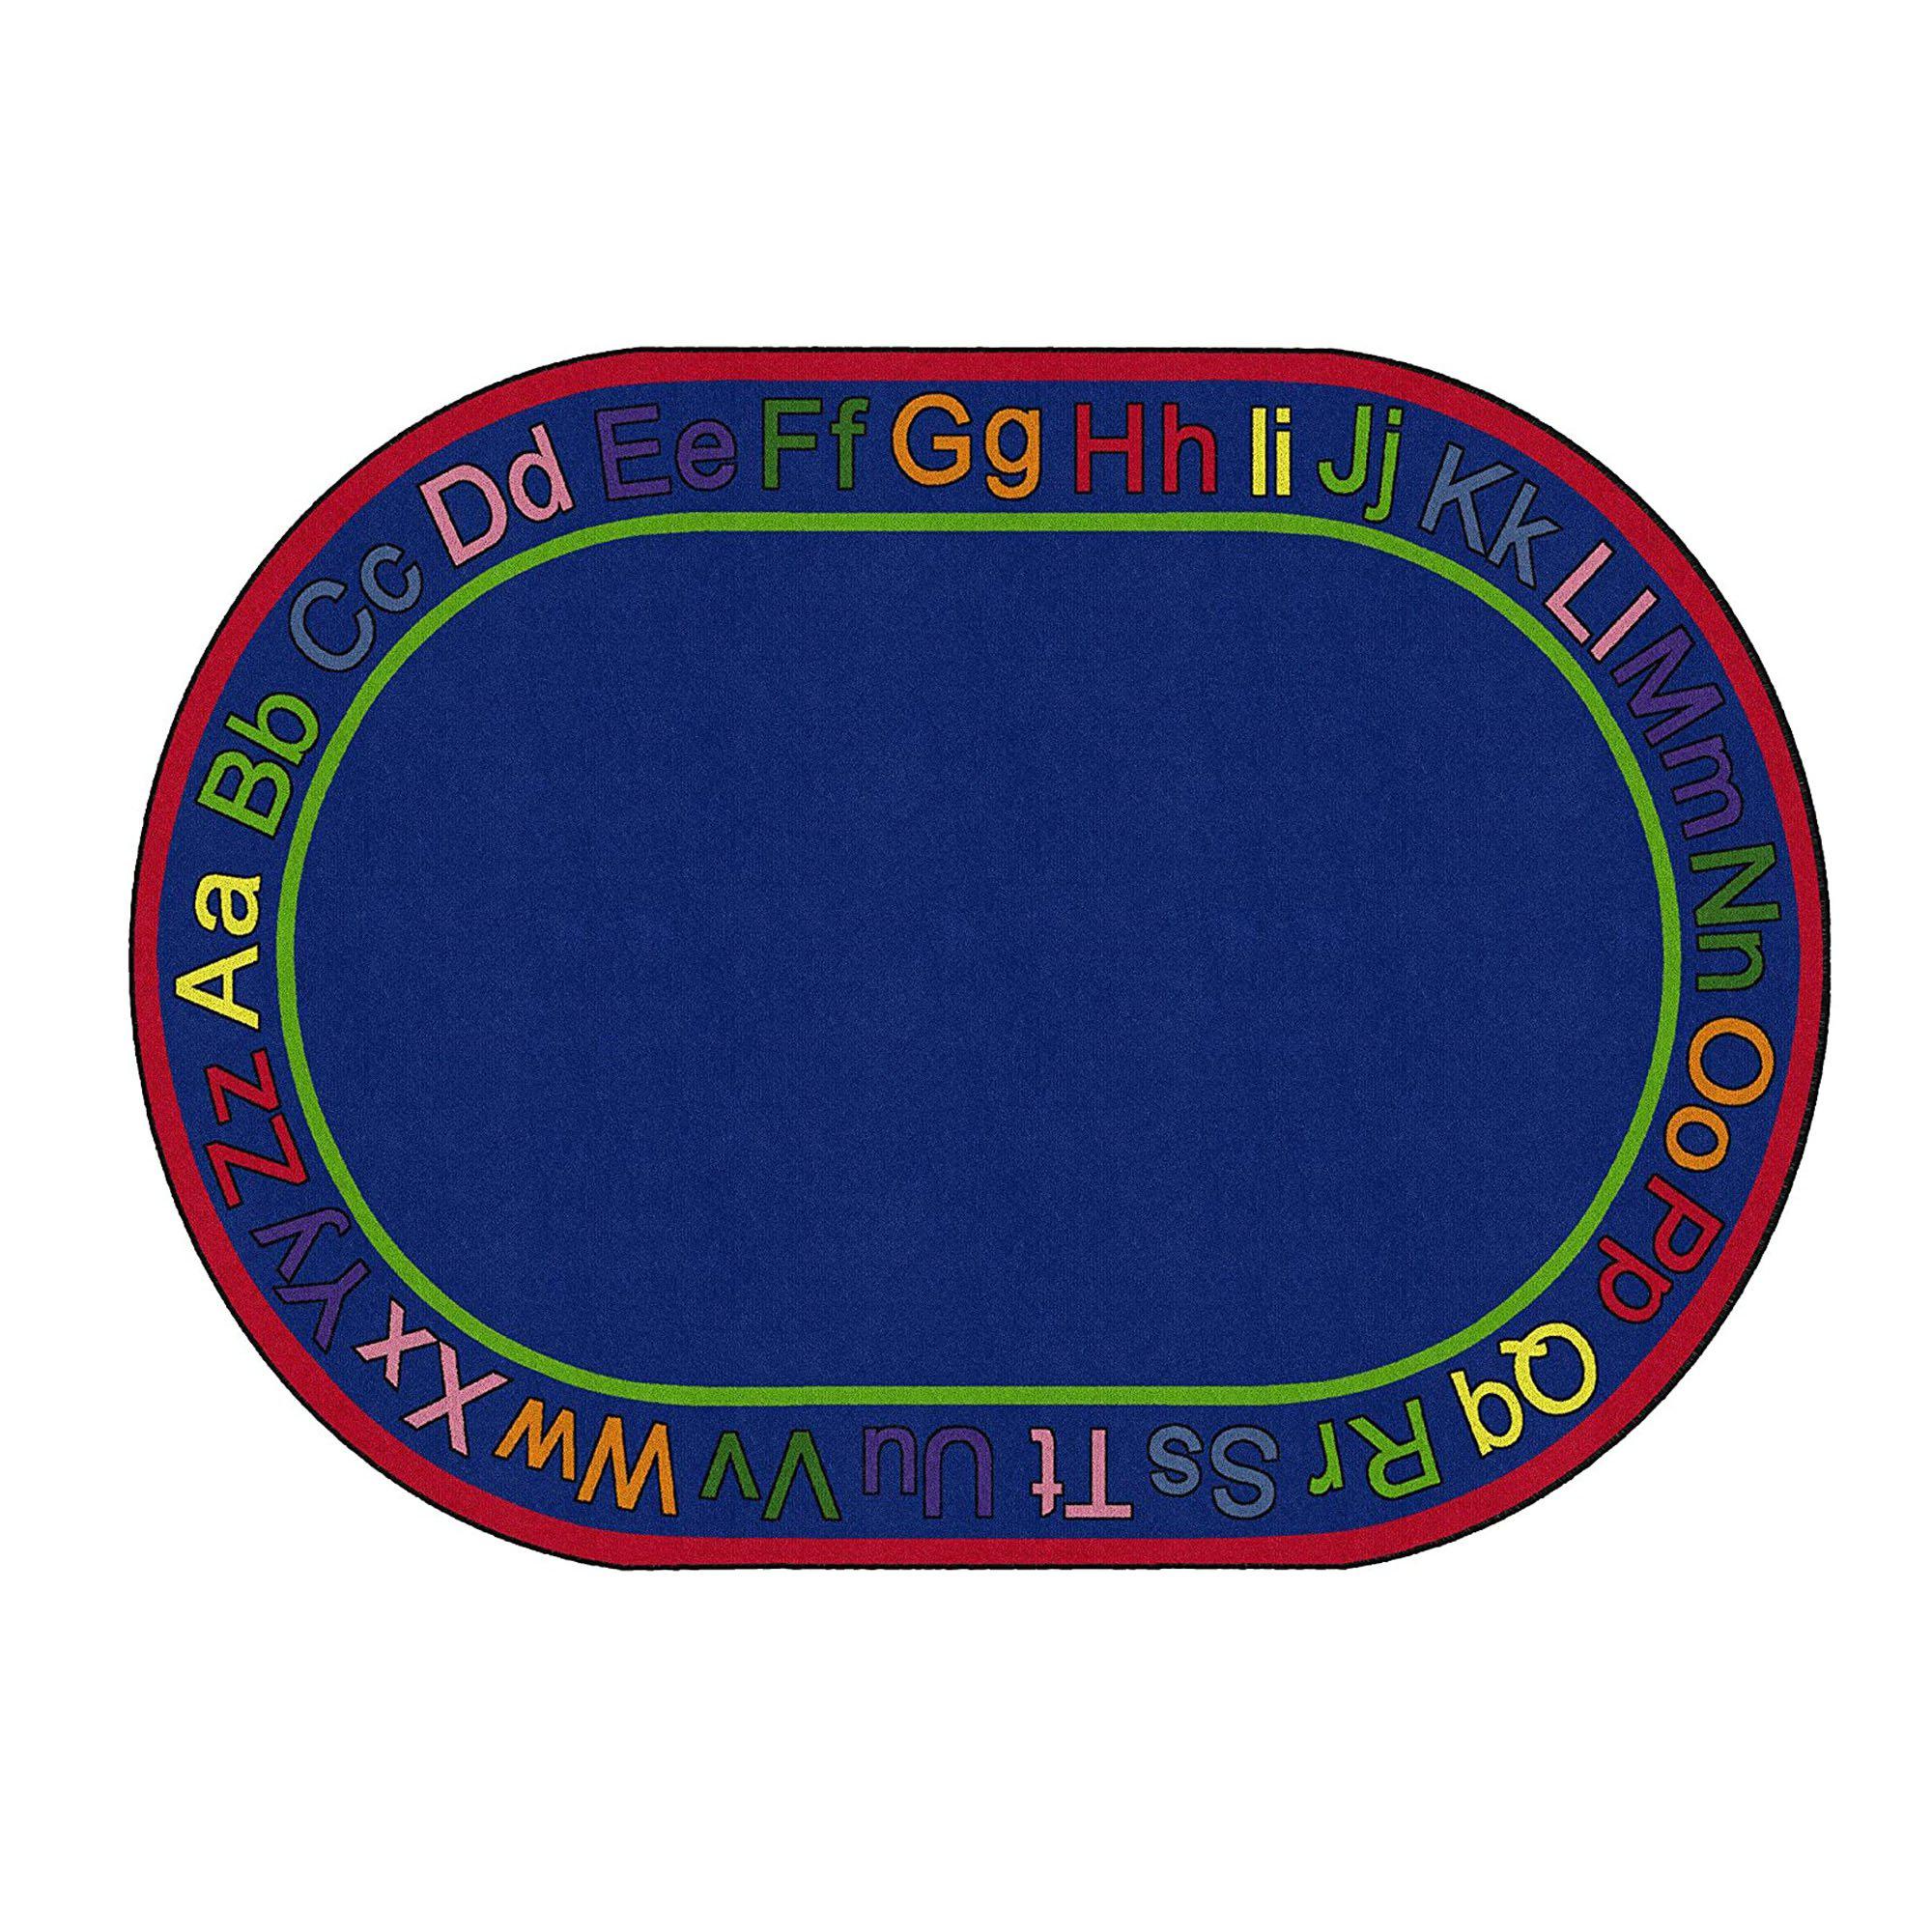 Know Your ABC's Rug, Oval, 10' 6" x 13' 2"